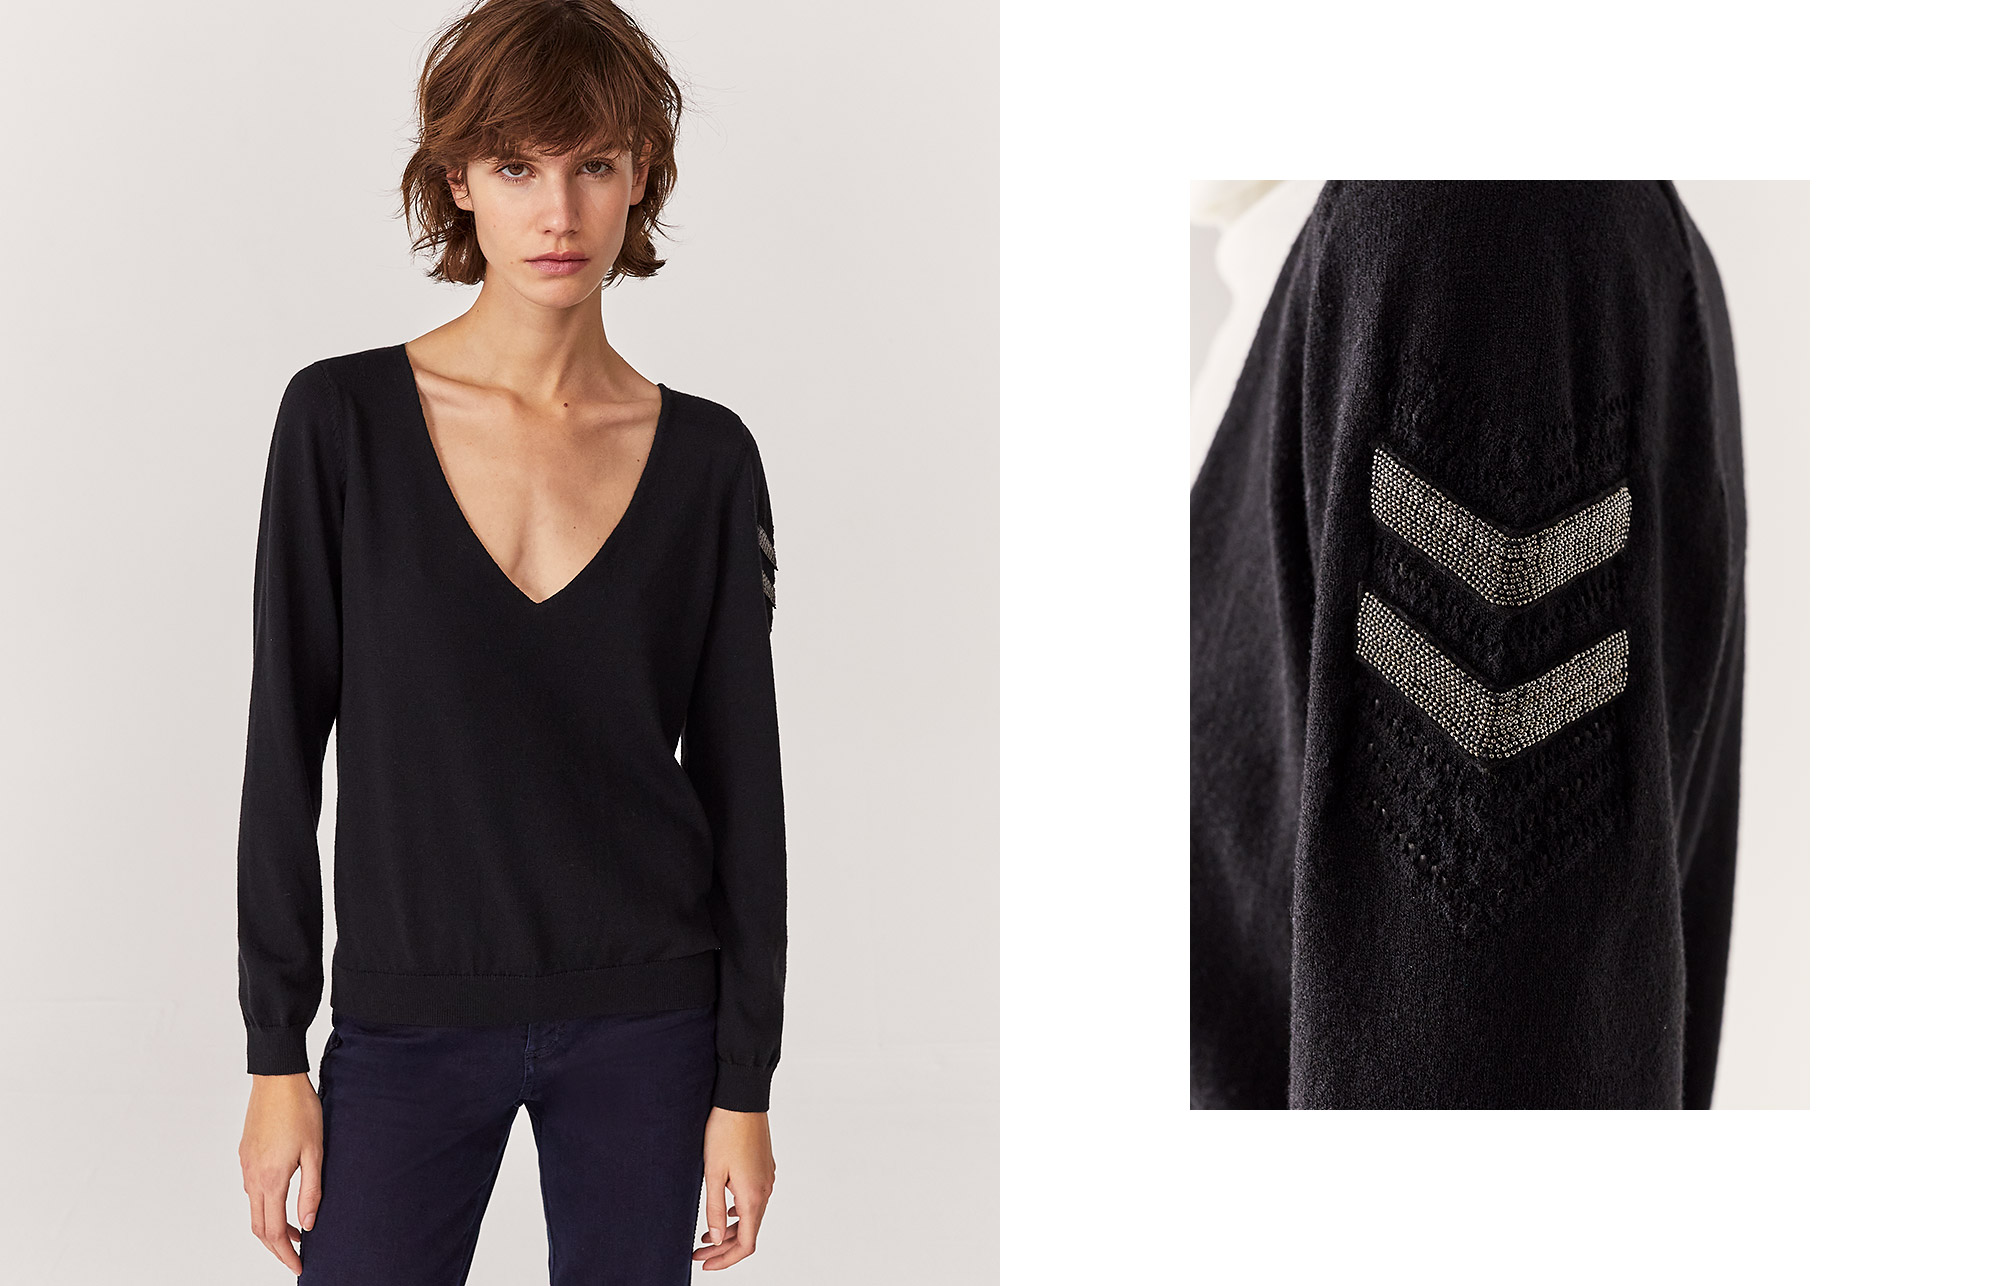 Women’s black military-style beaded knit sweater